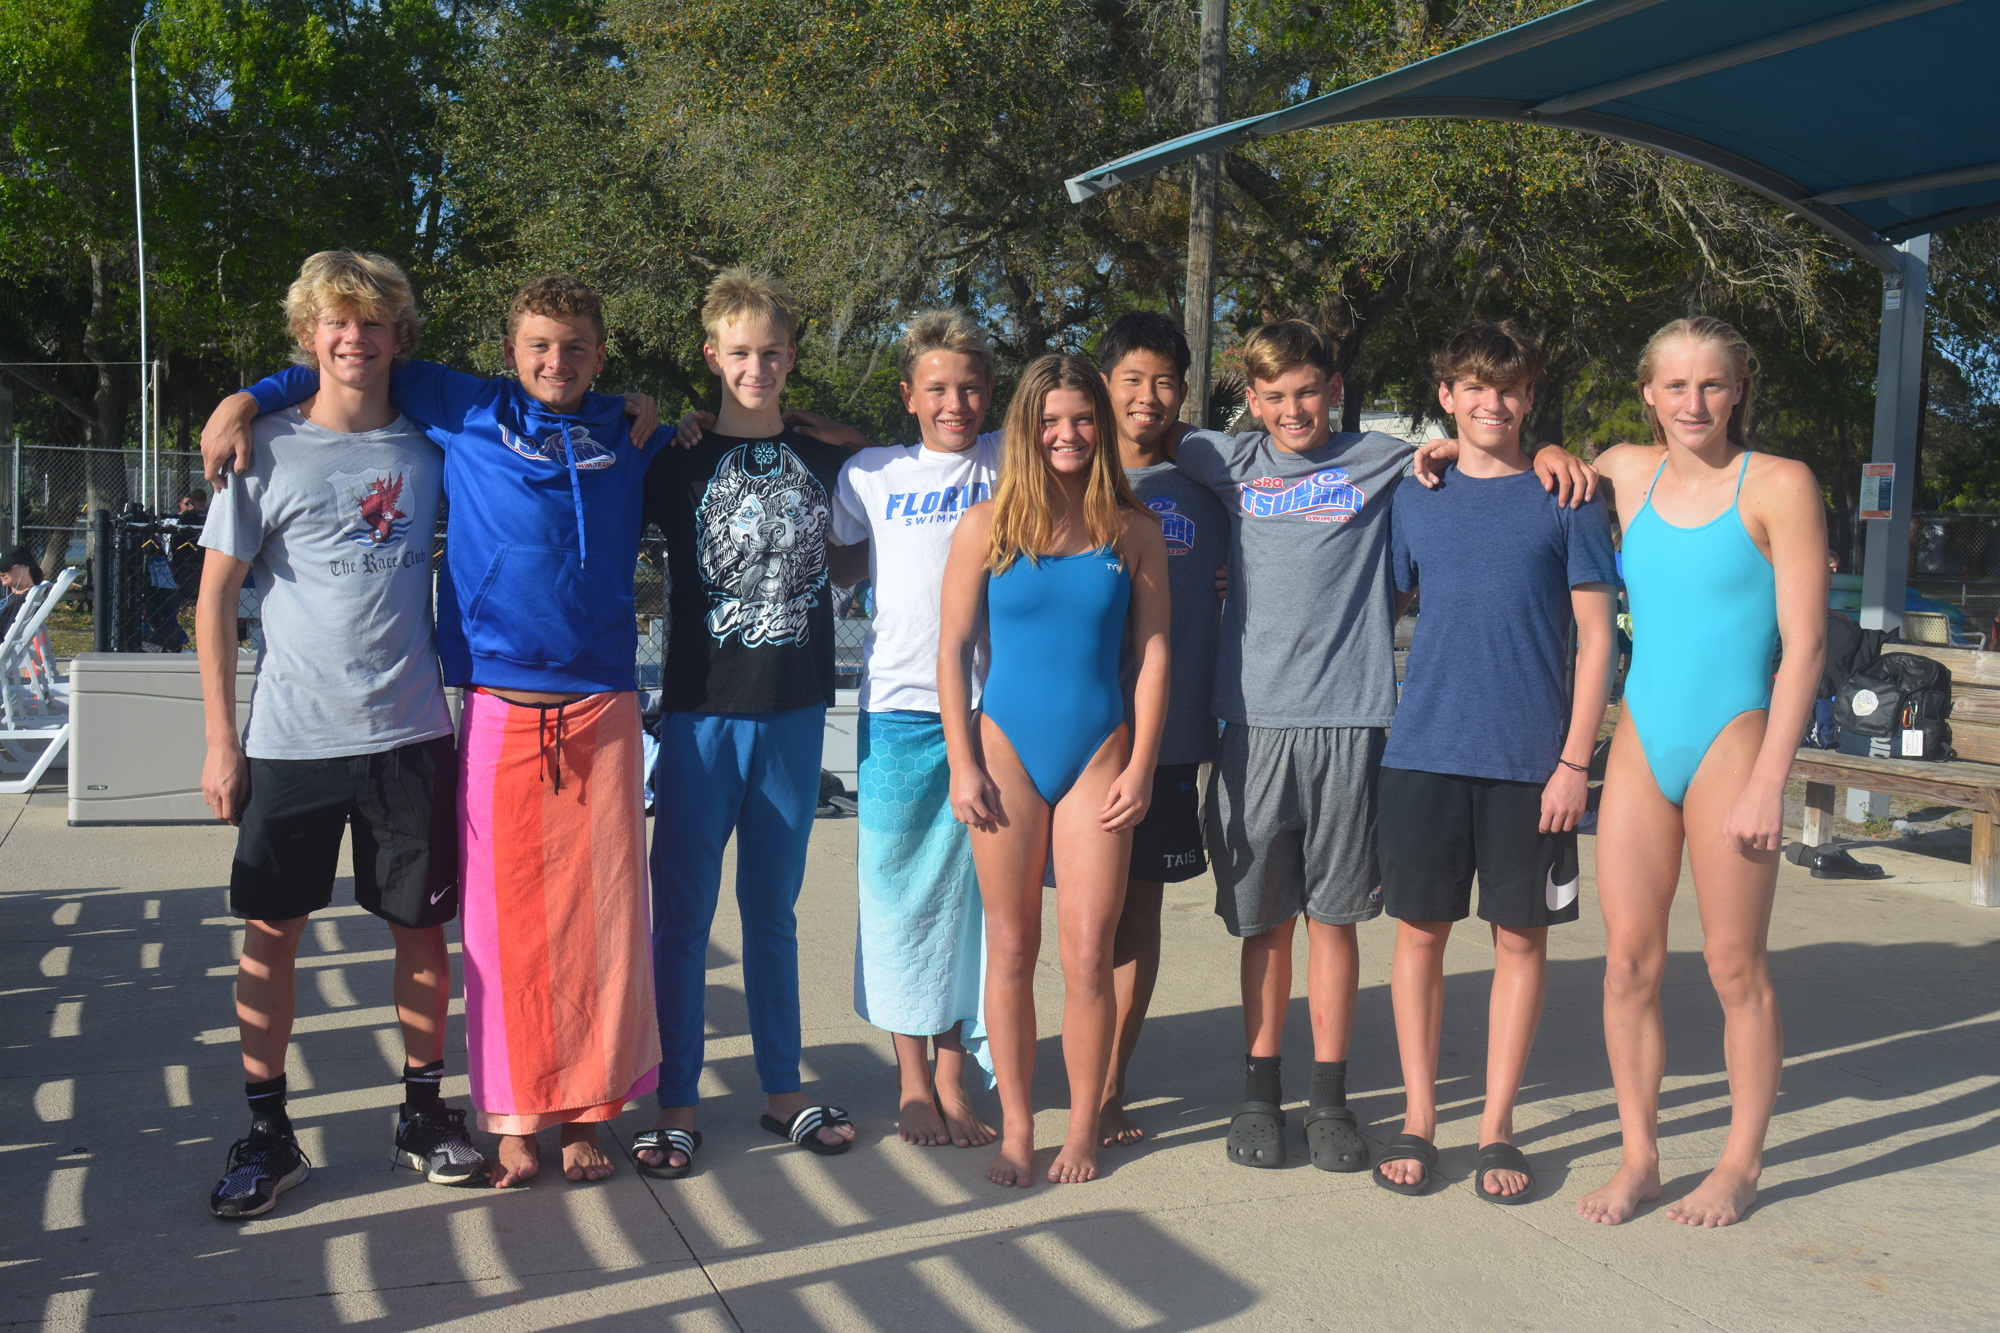 The Sarasota Tsunami won the short course FLAGS championship held March 3-6 in Tampa.